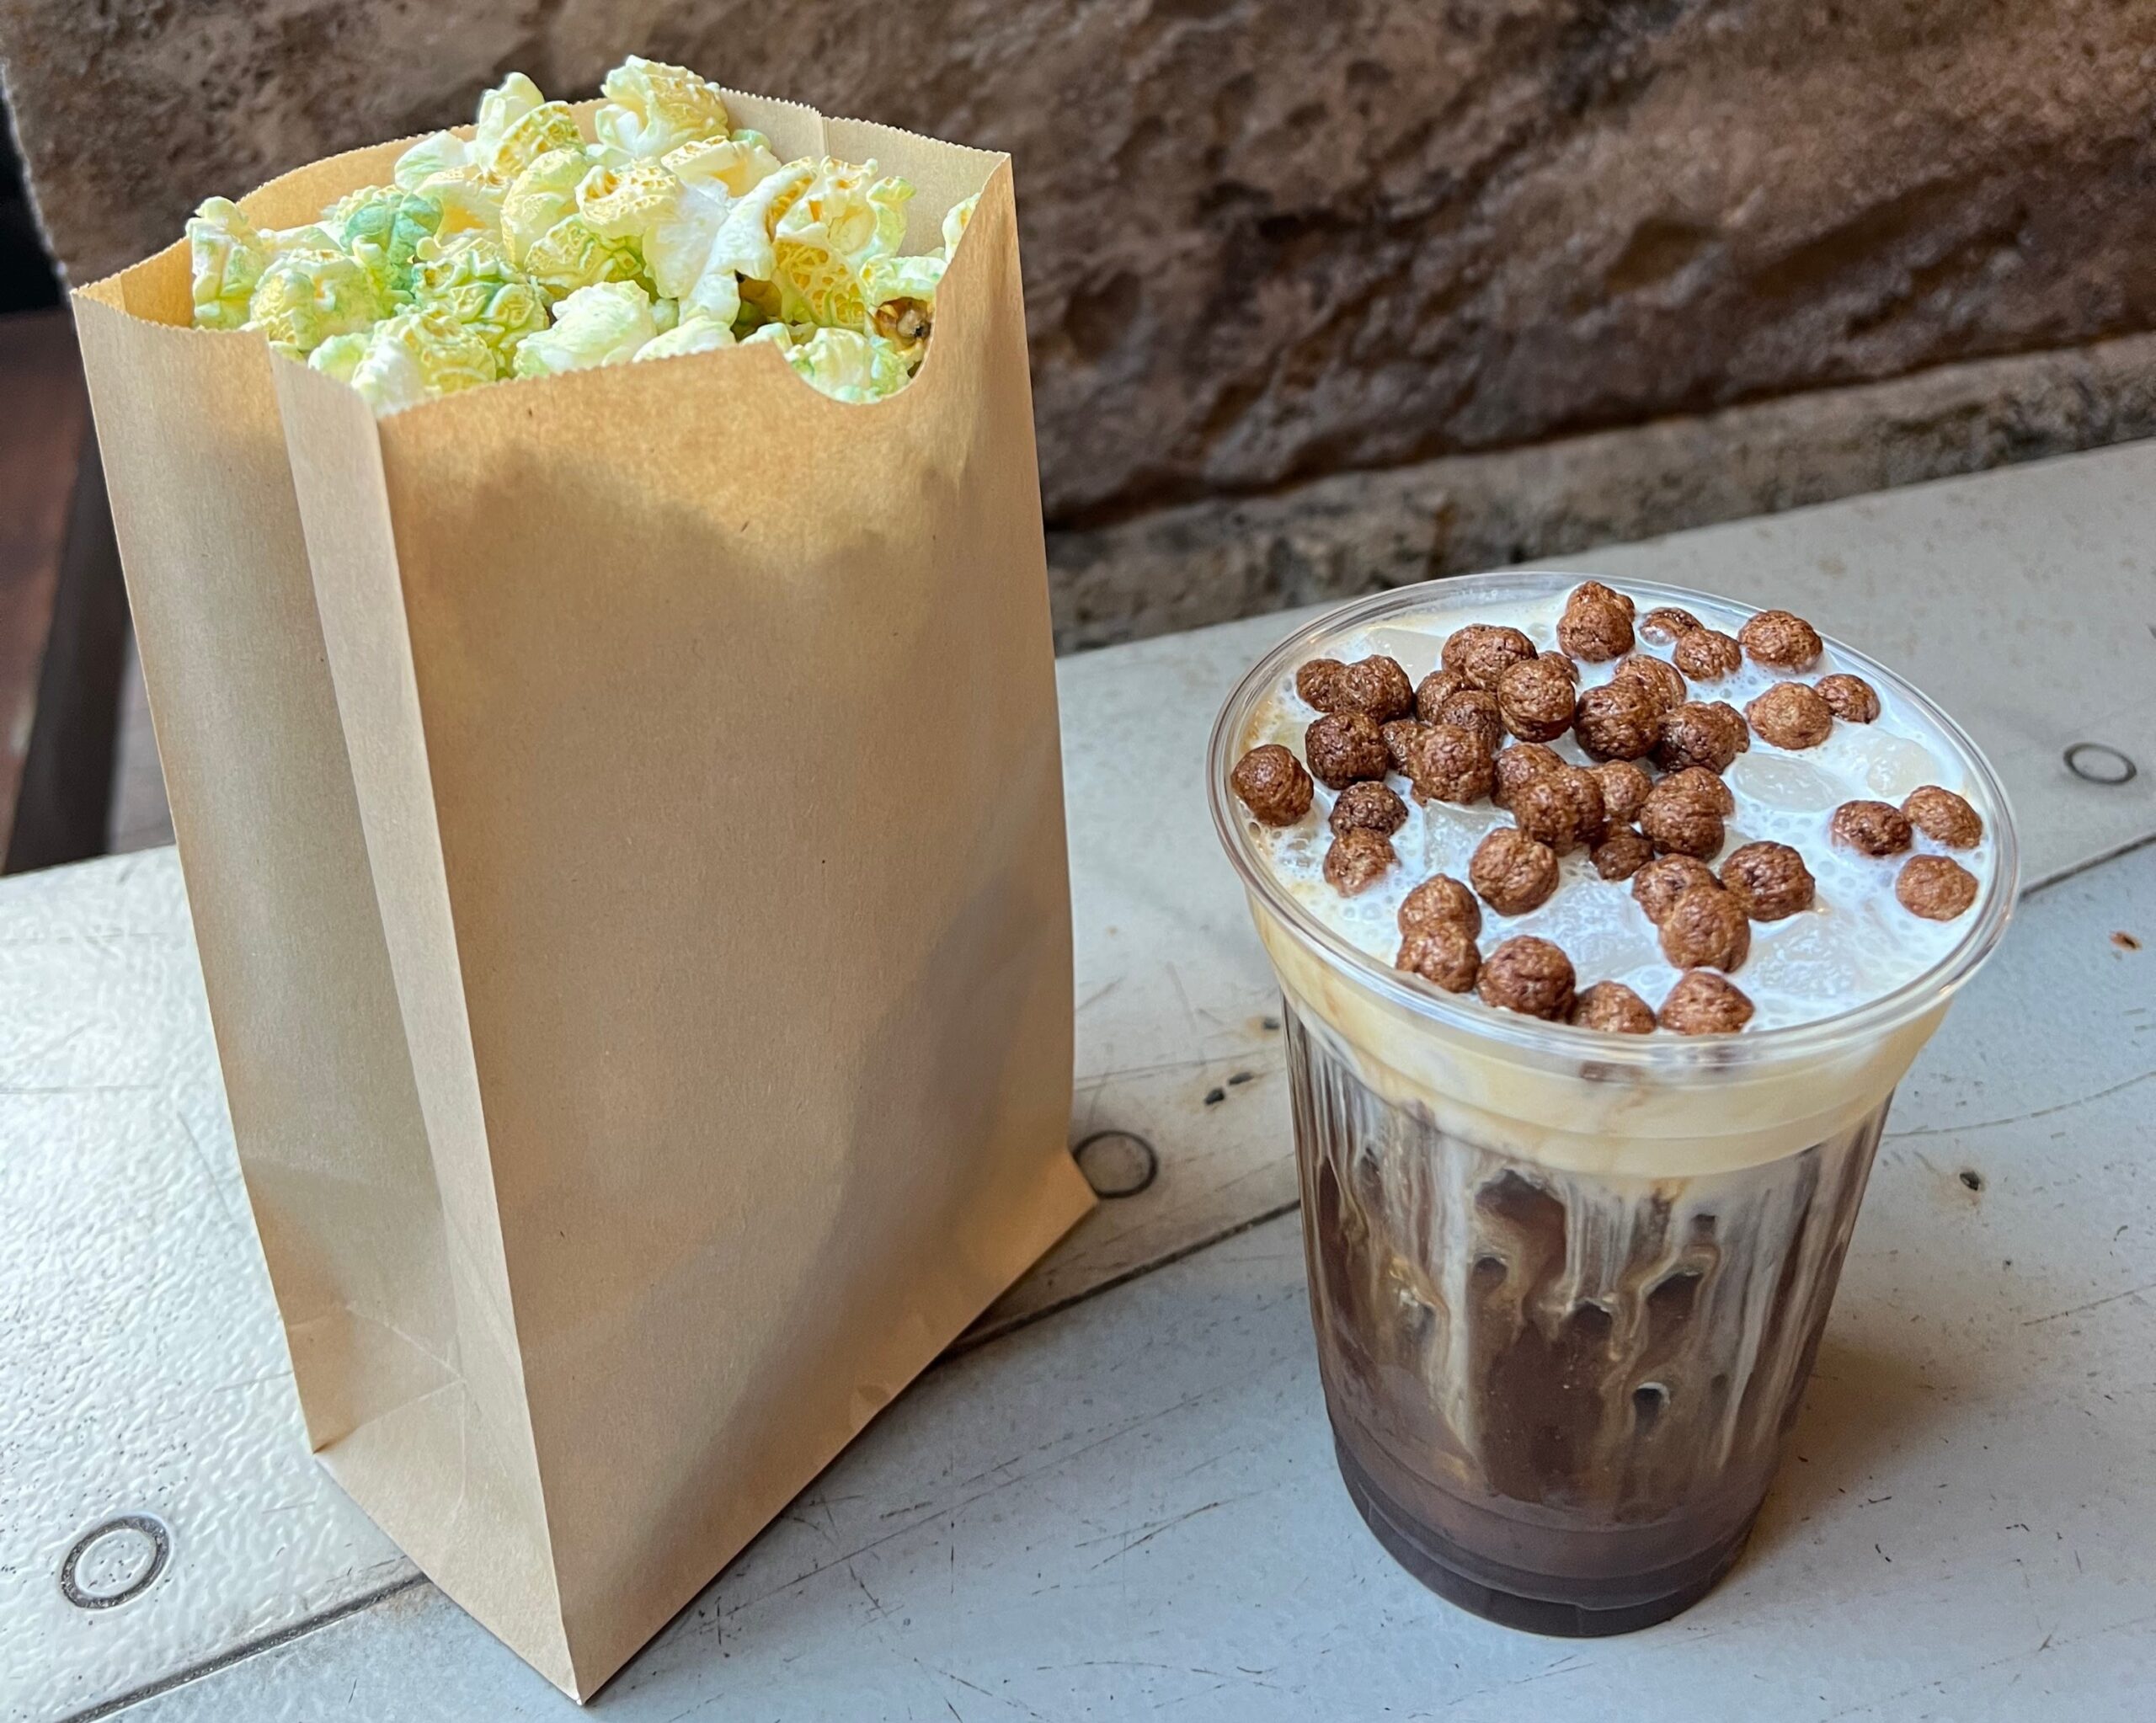 themed popcorn and coffee drink from star wars galaxy's edge at hollywood studios